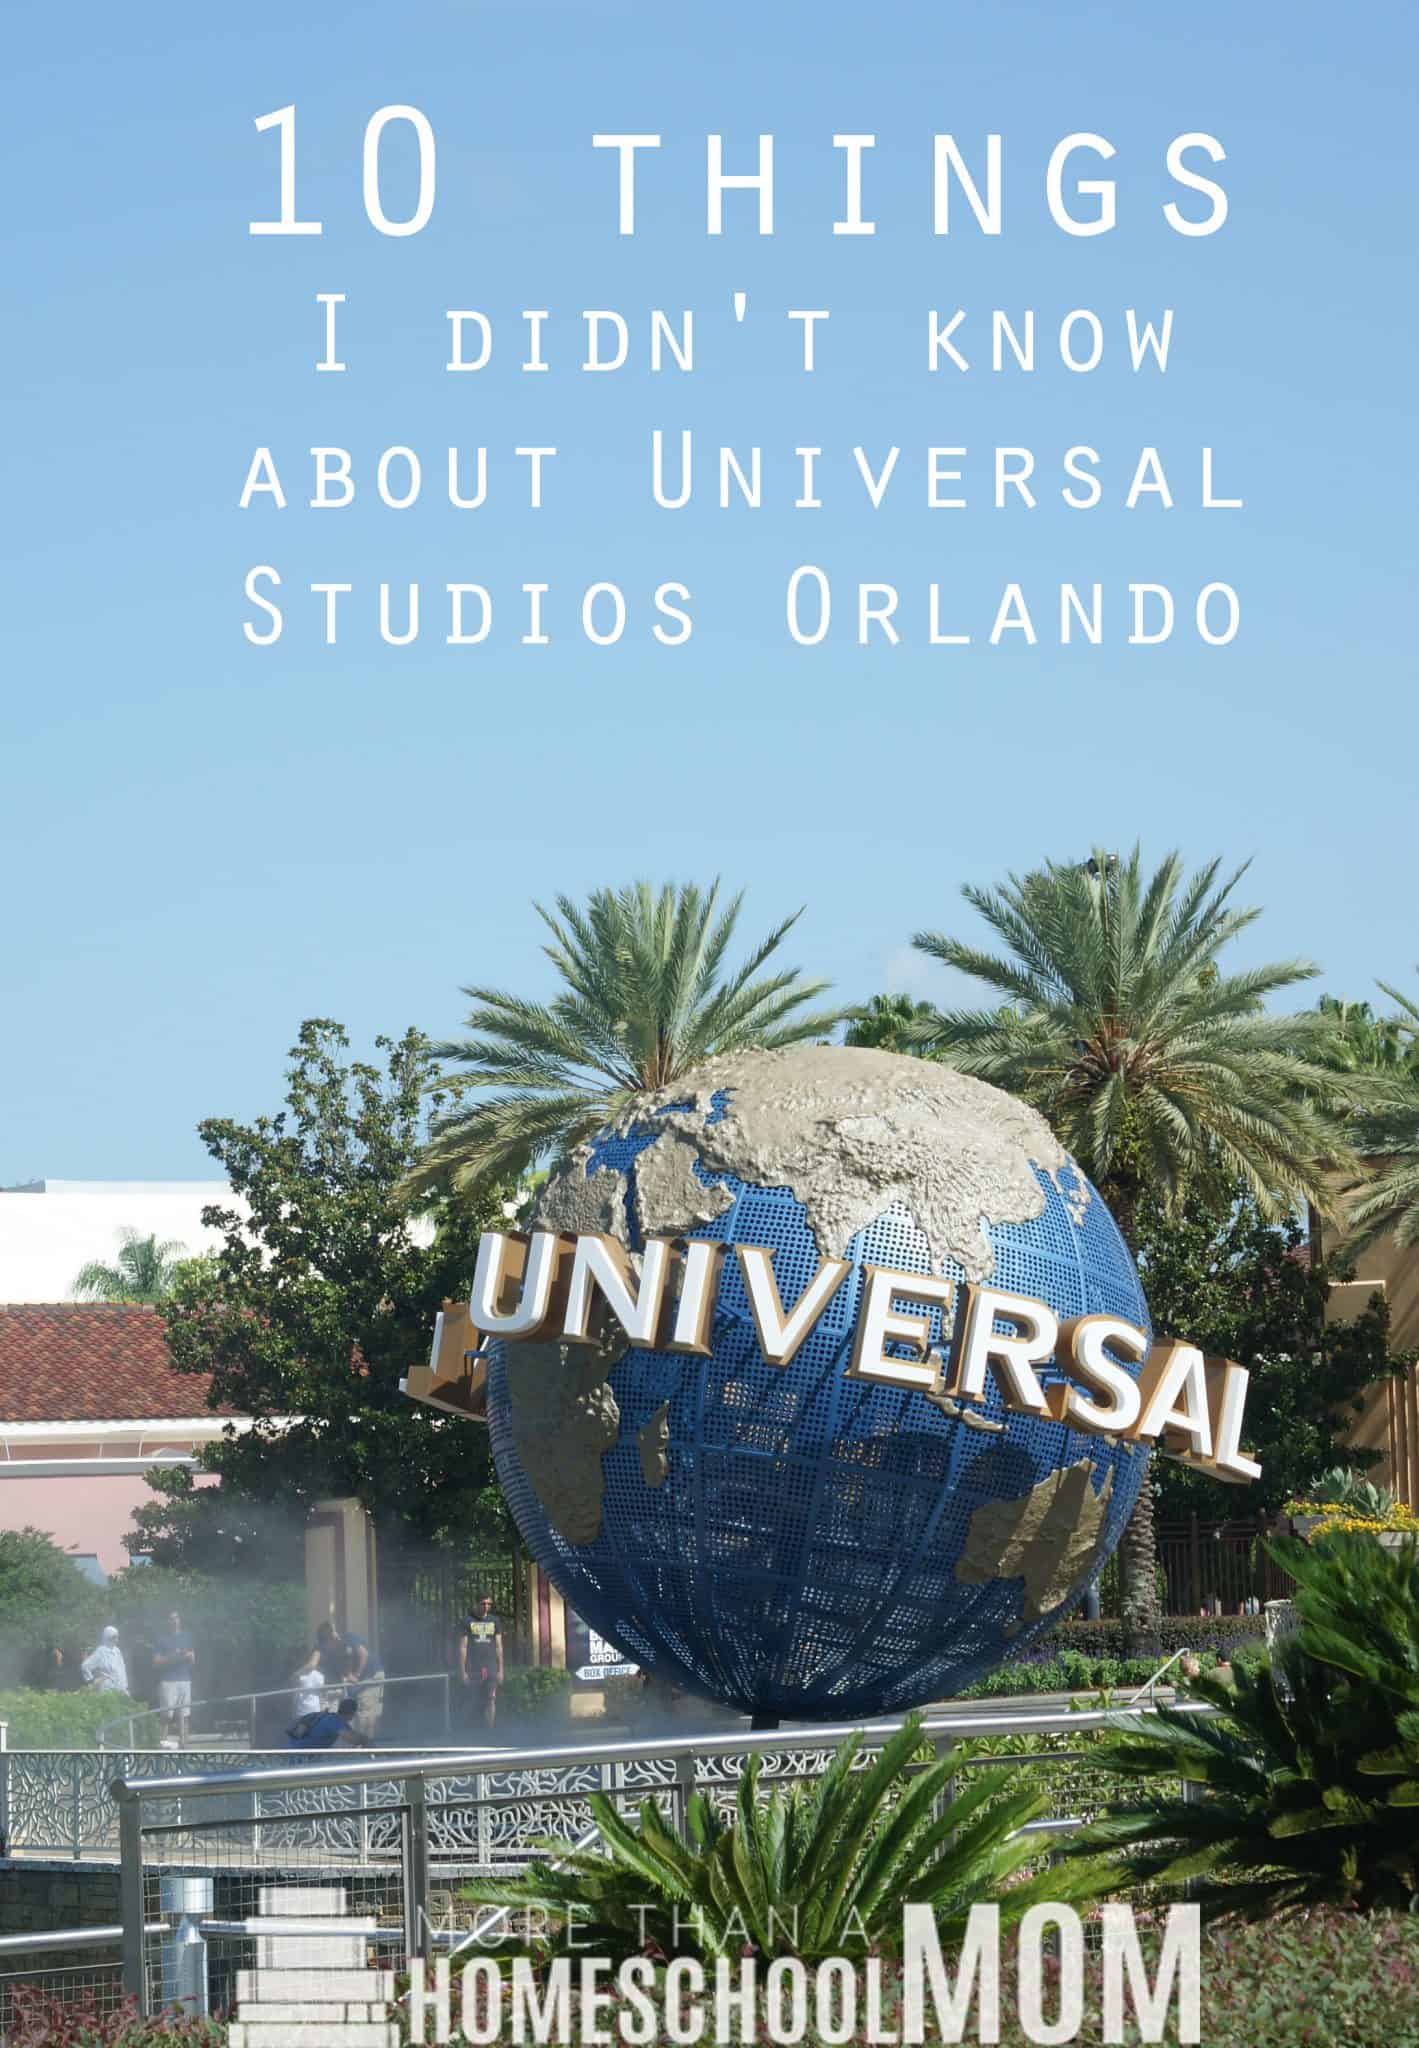 10 Things I didn't know about Universal Studios Orlando - Tips for visiting Universal Studios Orlando and enjoying Diagon Alley - #HarryPotter #UniversalStudios #DiagonAlley #Travel #Florida #orlando #Universal